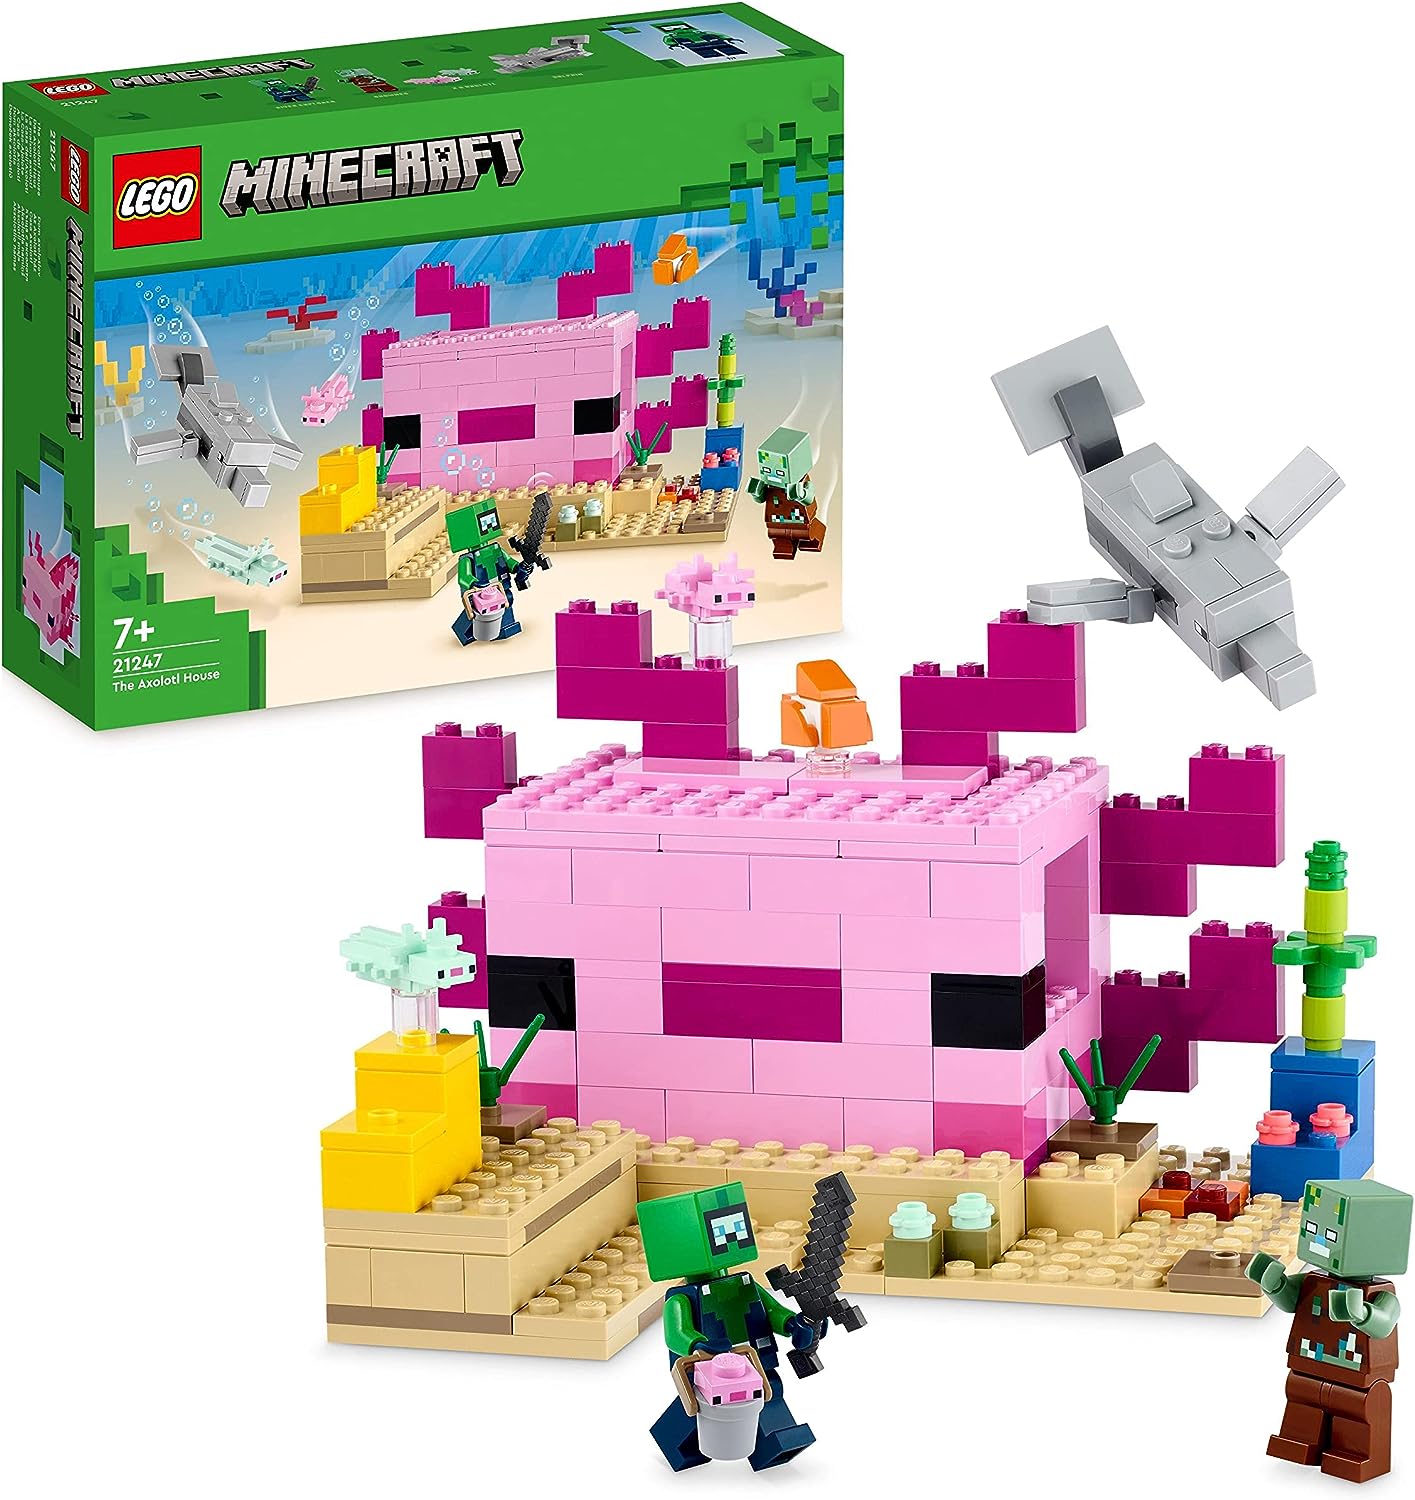 LEGO 21247 Minecraft The Axolotl House Set, Buildable Pink Underwater Base with Dive Explorer, Zombie, Dolphin and Puffer Fish Figures, Adventure Toy for Children from 7 Years